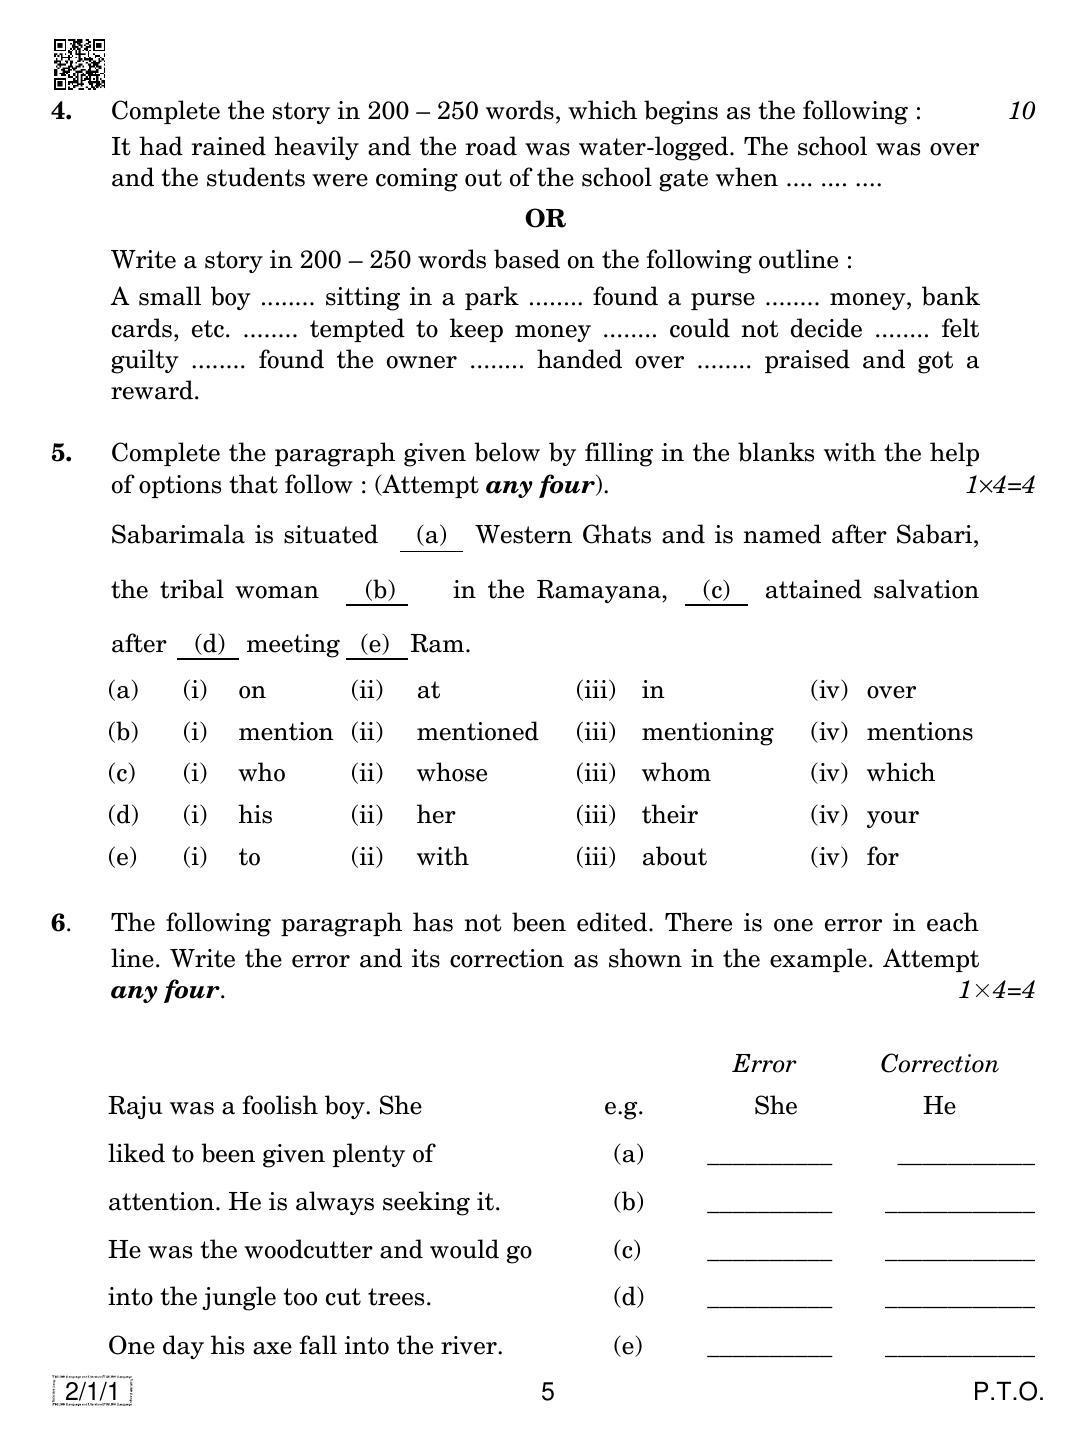 CBSE Class 10 2-1-1 ENGLISH LANG. & LIT. 2019 Compartment Question Paper - Page 5